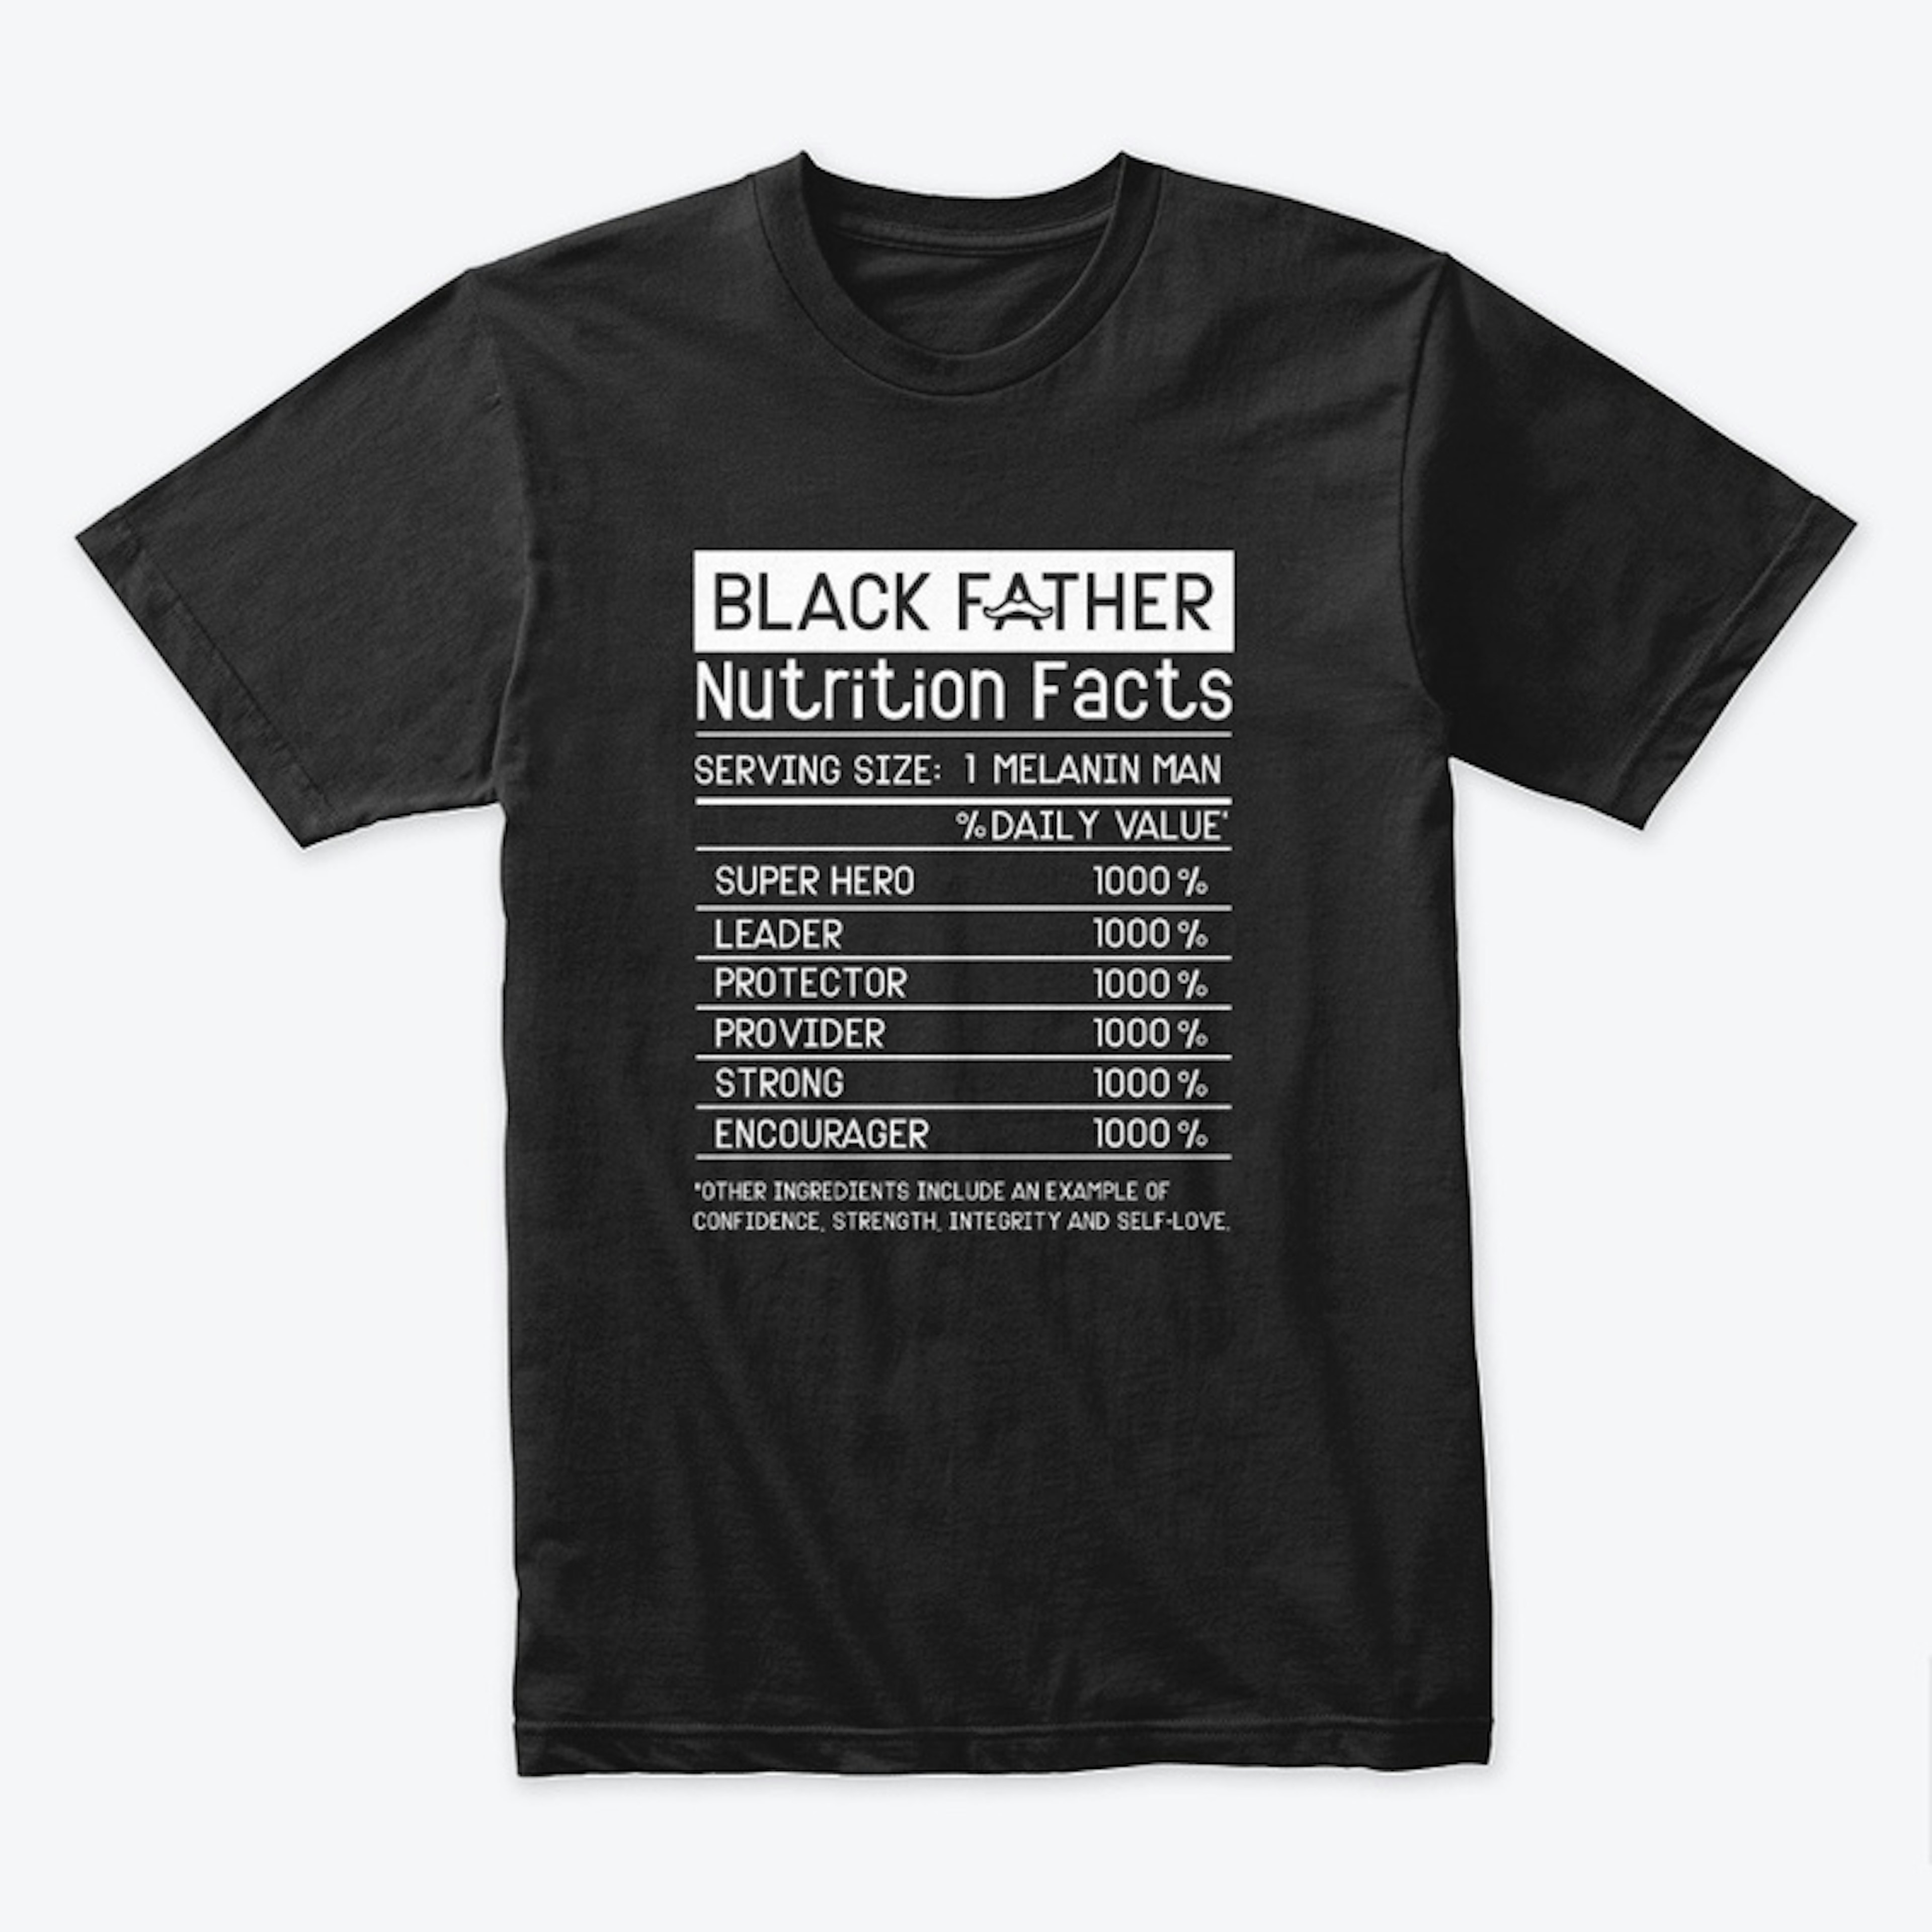 Black Father Nutritional Facts 